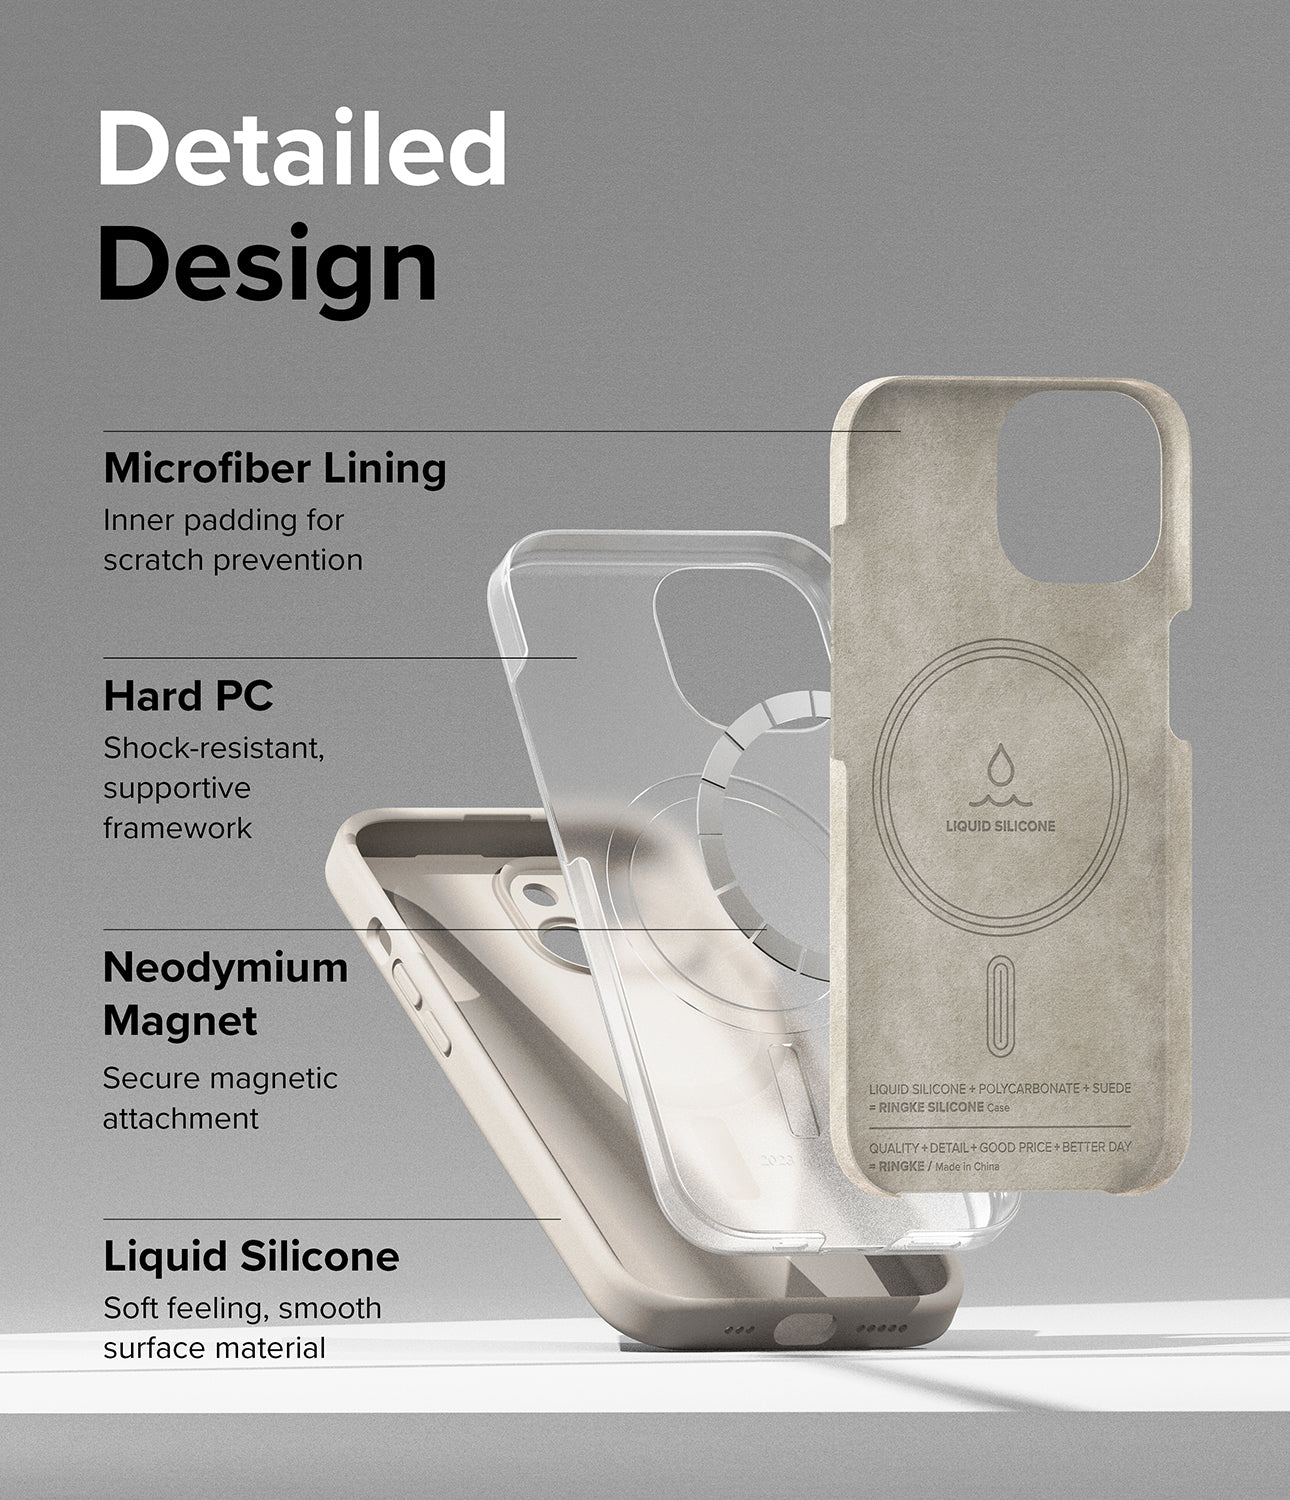 iPhone 15 Case | Silicone Magnetic - Stone - Detailed Design. Inner padding for scratch prevention with Microfiber Lining. Shock-resistant, supportive framework with Hard PC. Secure magnetic attachment with Neodymium Magnet. Soft feeling, smooth surface material with Liquid Silicone.